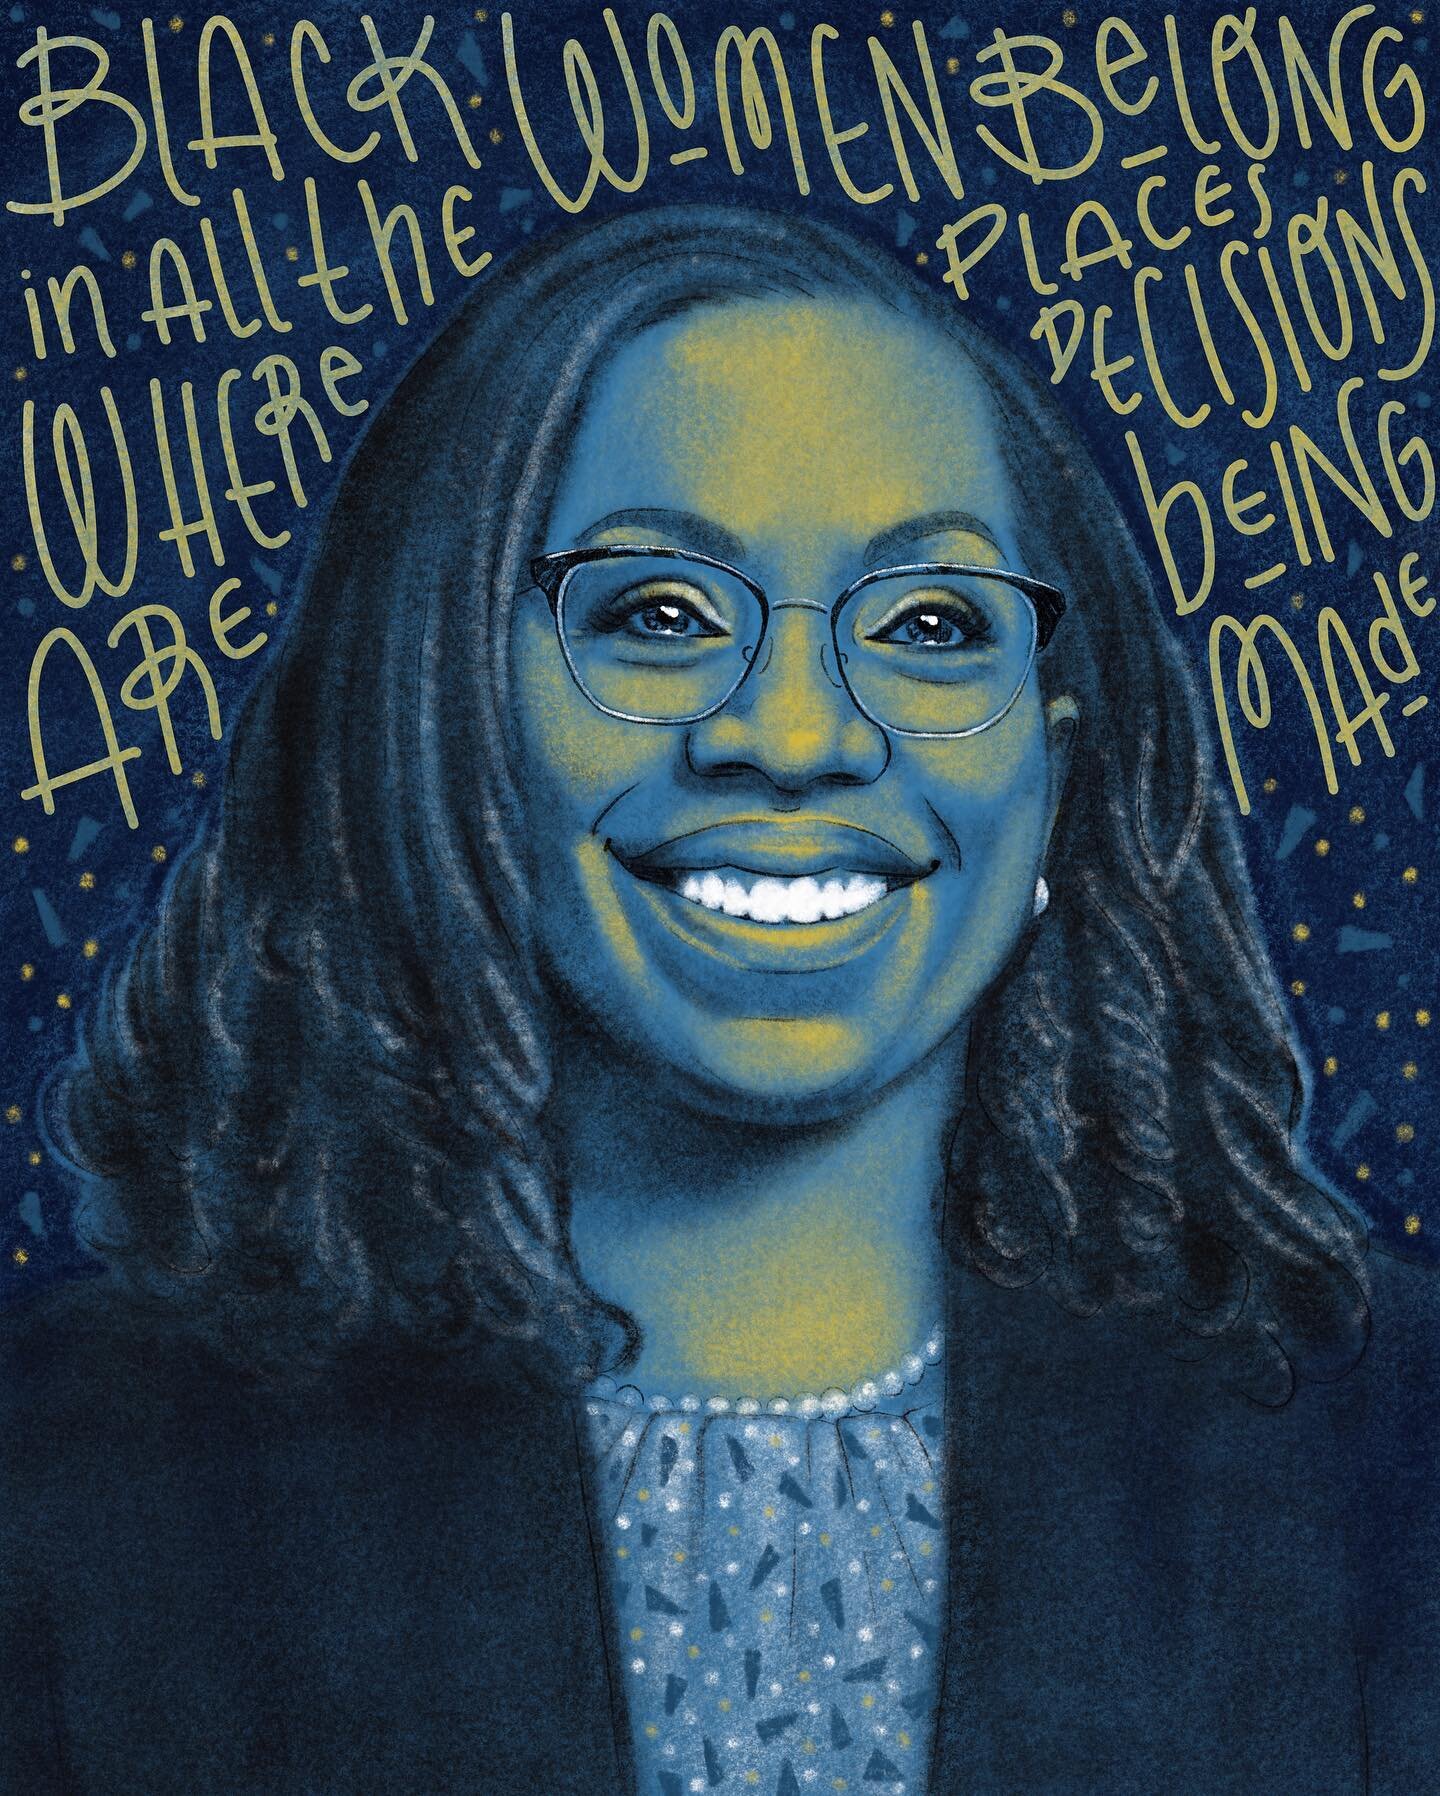 Here's my drawing of Ketanji Brown Jackson being confirmed as the next nominee for the  Supreme Court. She would be the first Black woman to serve. Behind her I wrote &quot;Black women belong in all the places where decisions are being made.&quot; Ba